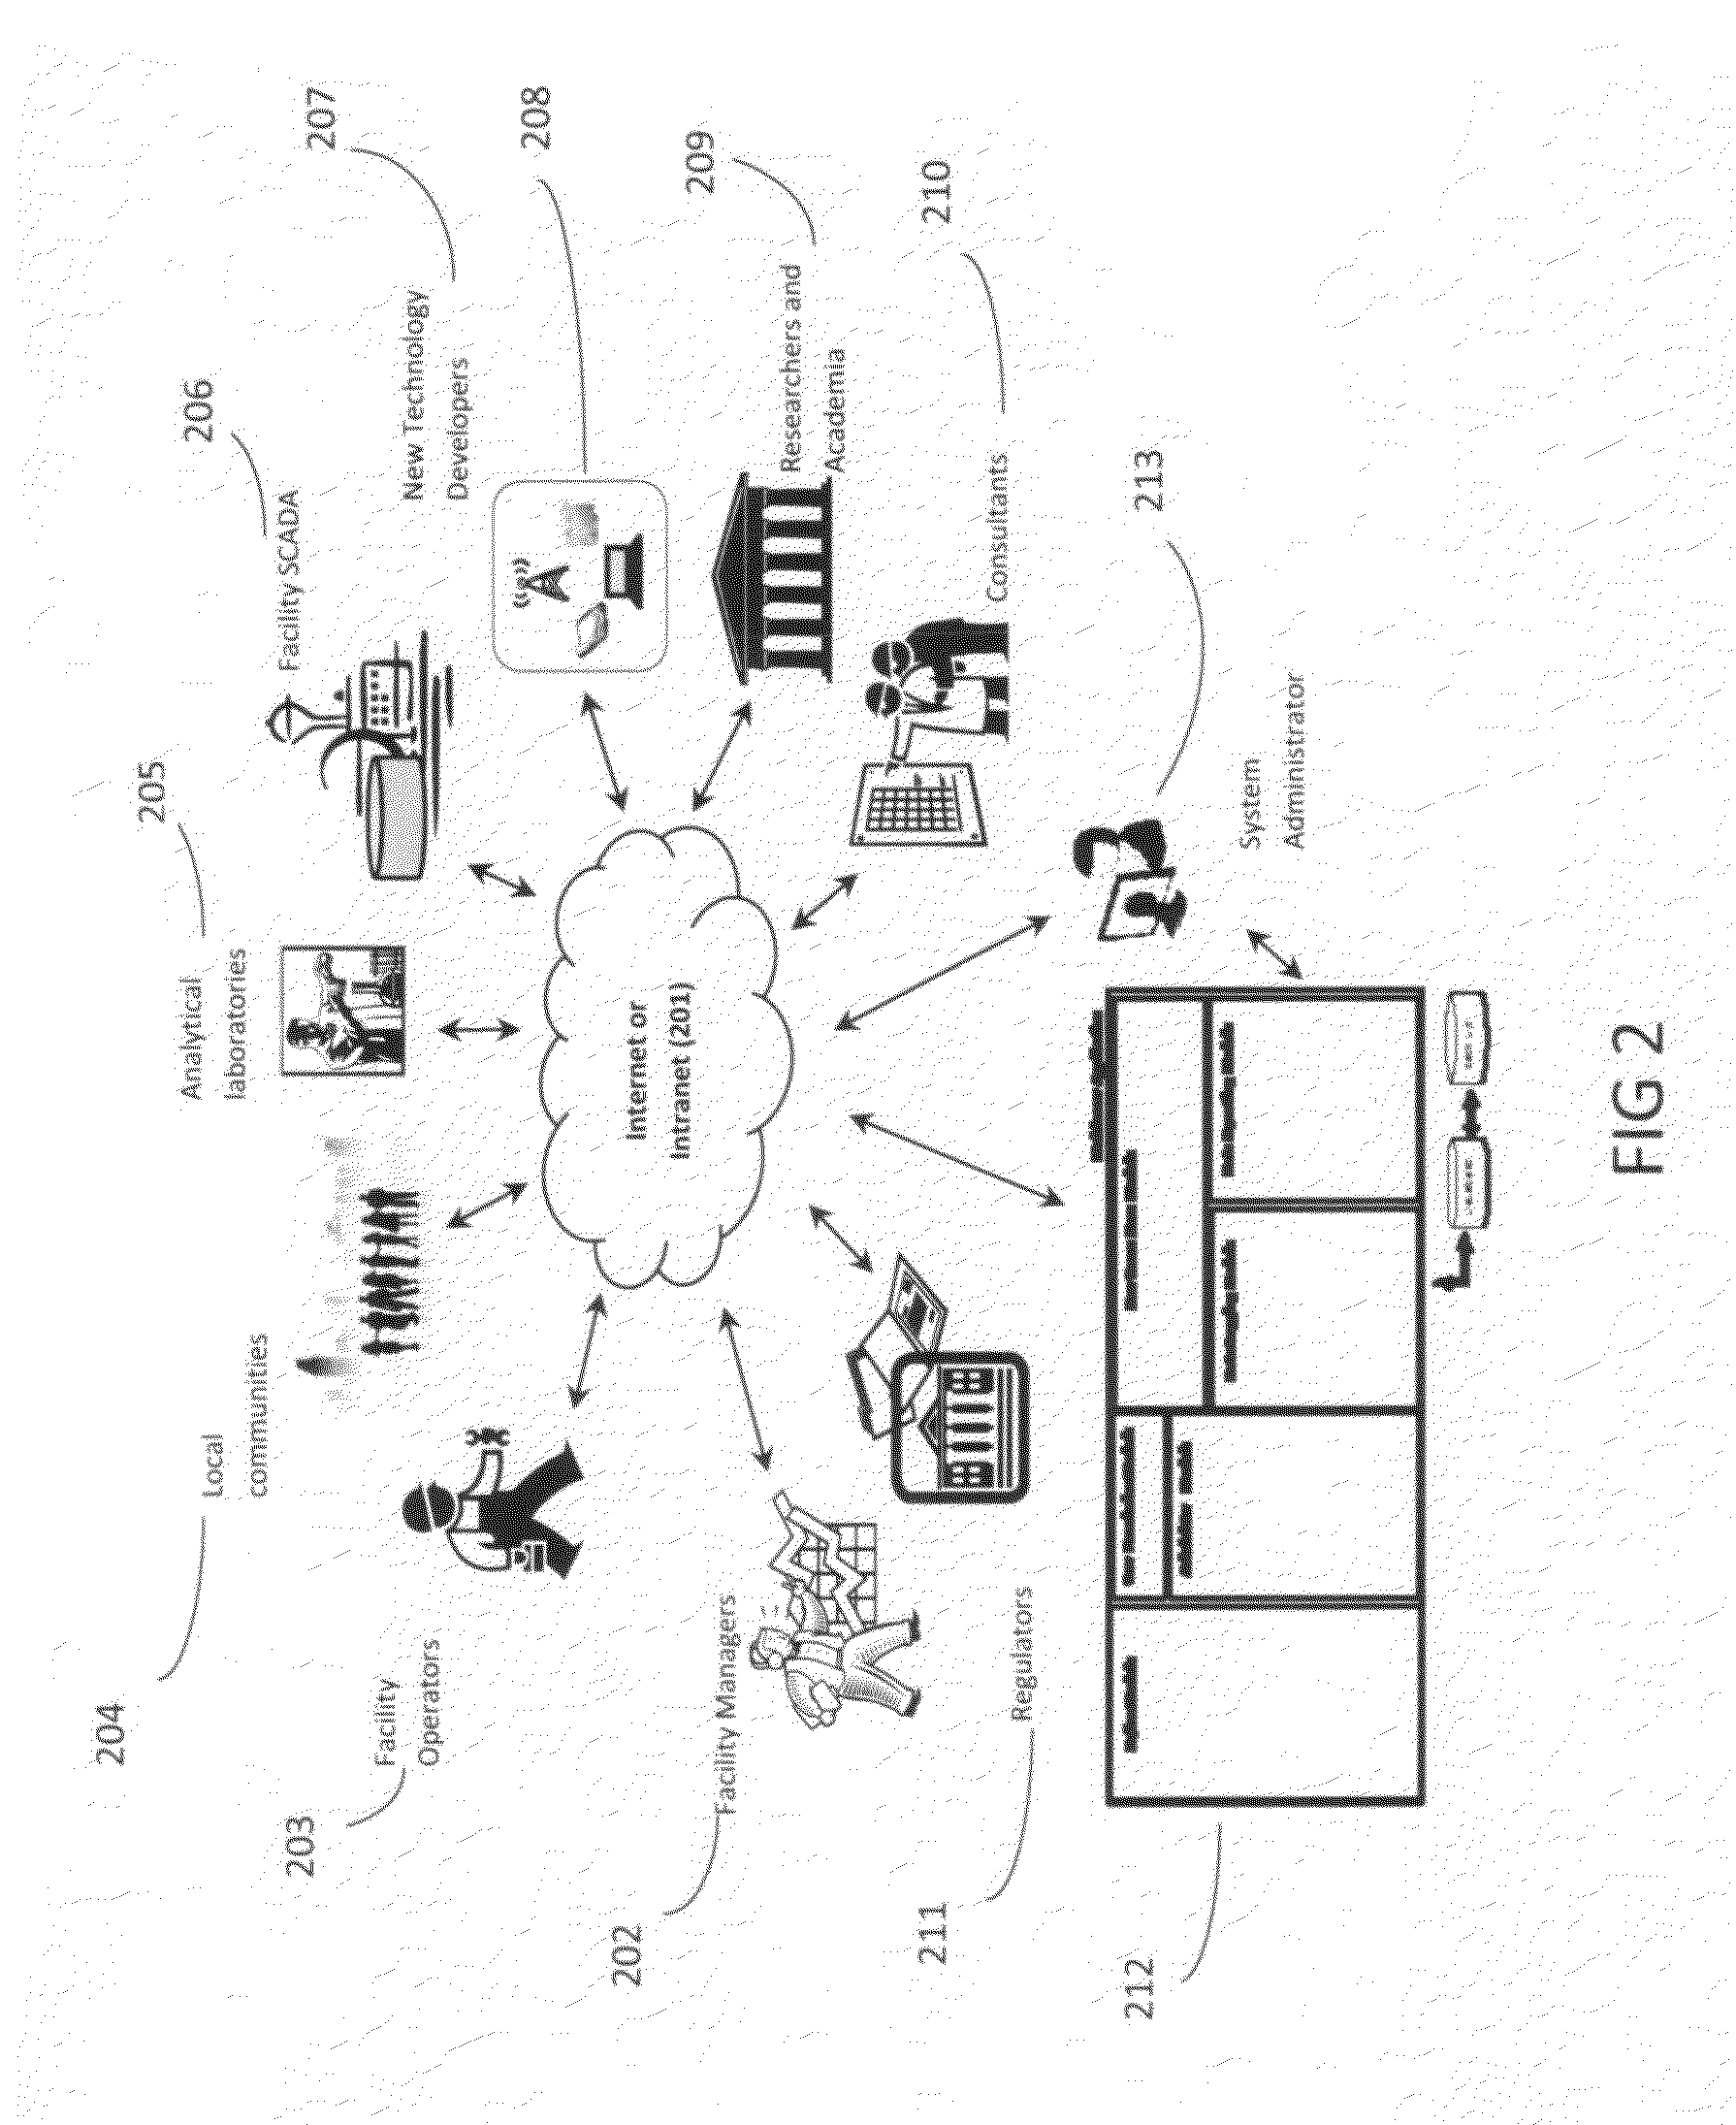 Form-based user-configurable processing plant management system and method